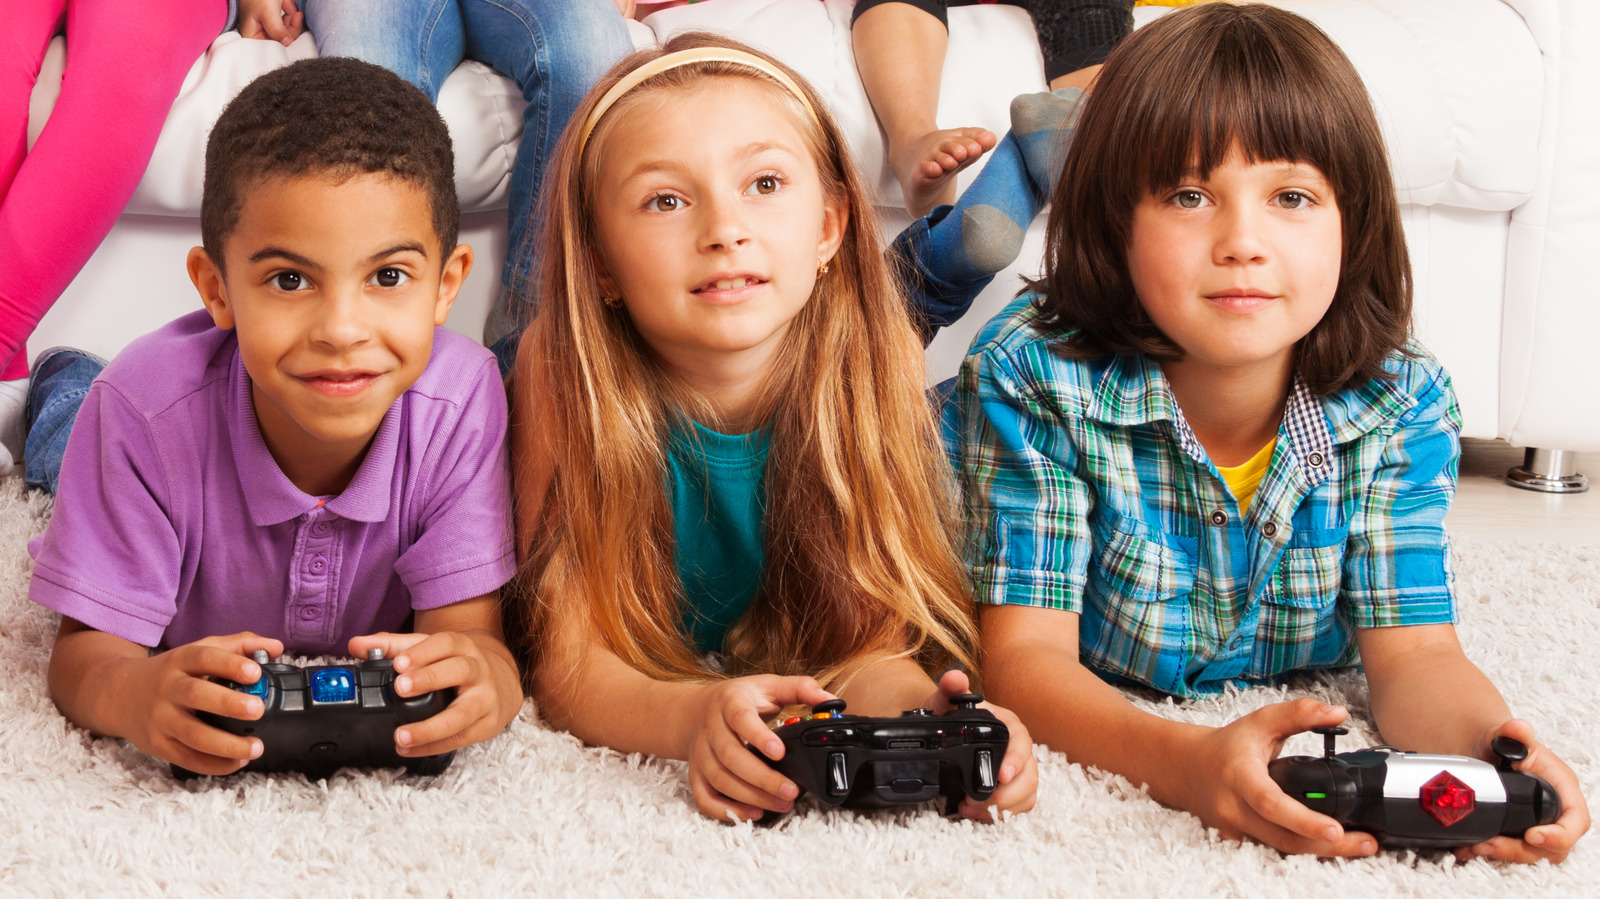 6 surprising benefits of video games for kids